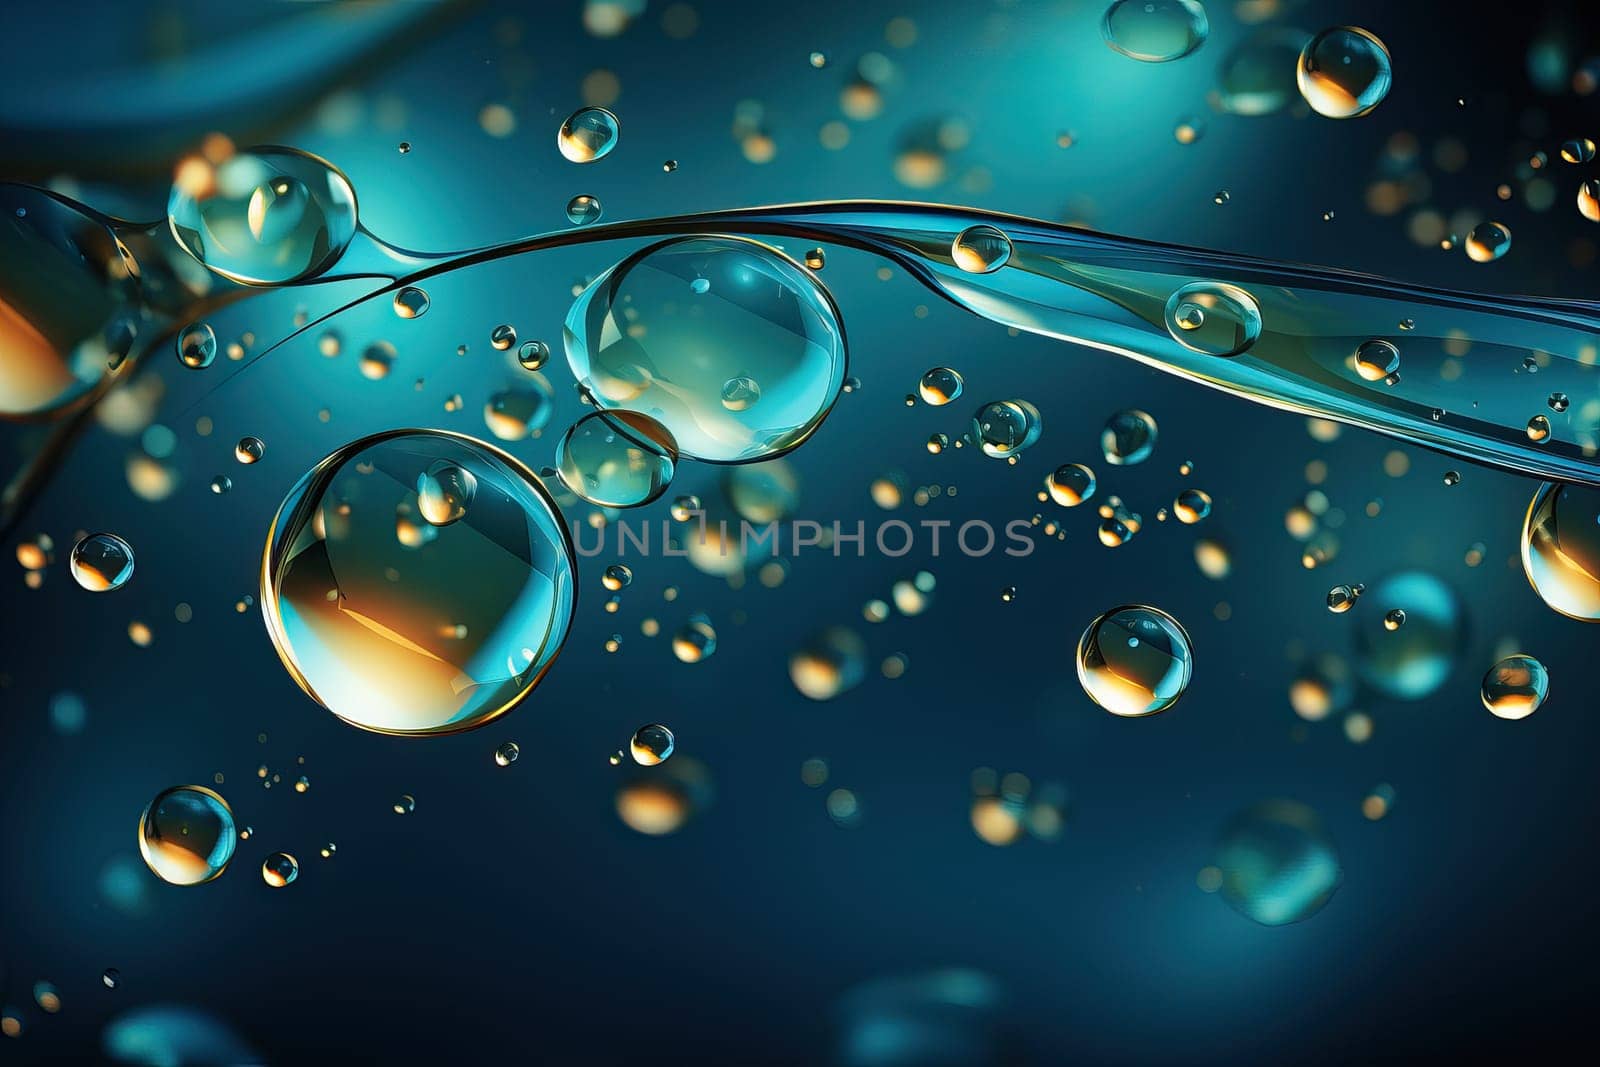 Aquamarine bubbles with green slight tint, abstract background with drops of aquamarine color close-up.